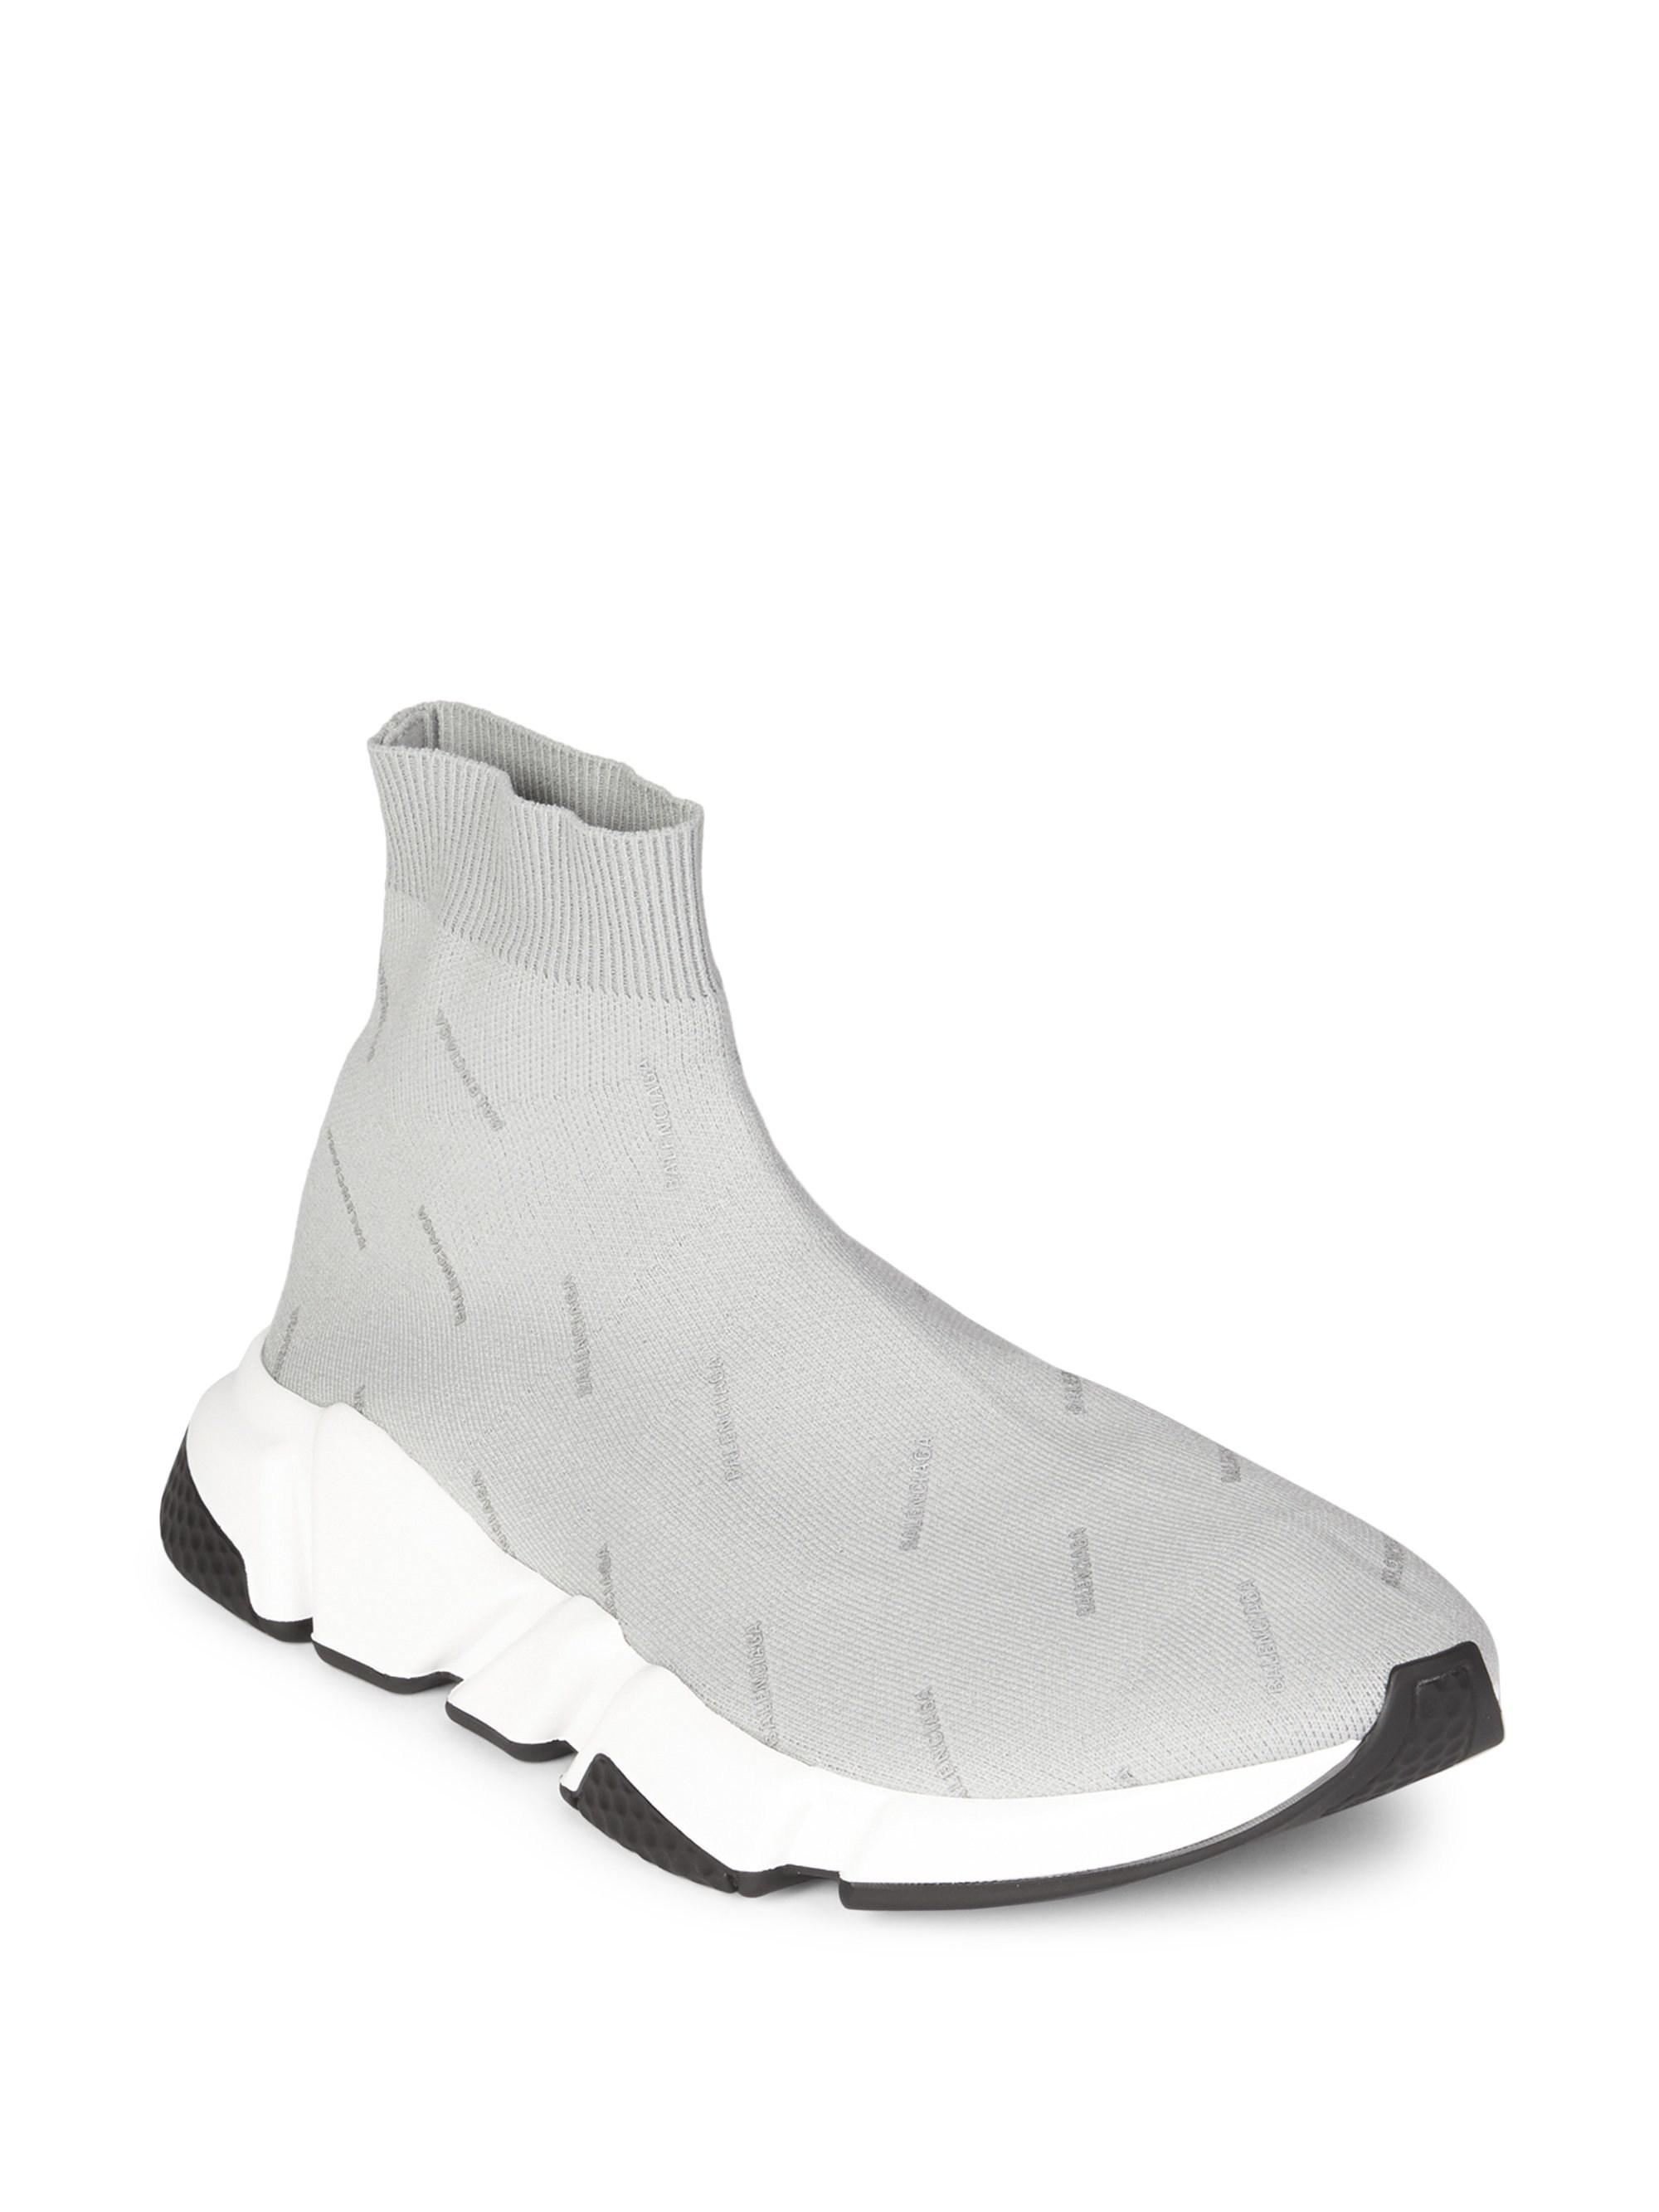 Balenciaga Speed Knit Sneakers in Gray for Men | Lyst